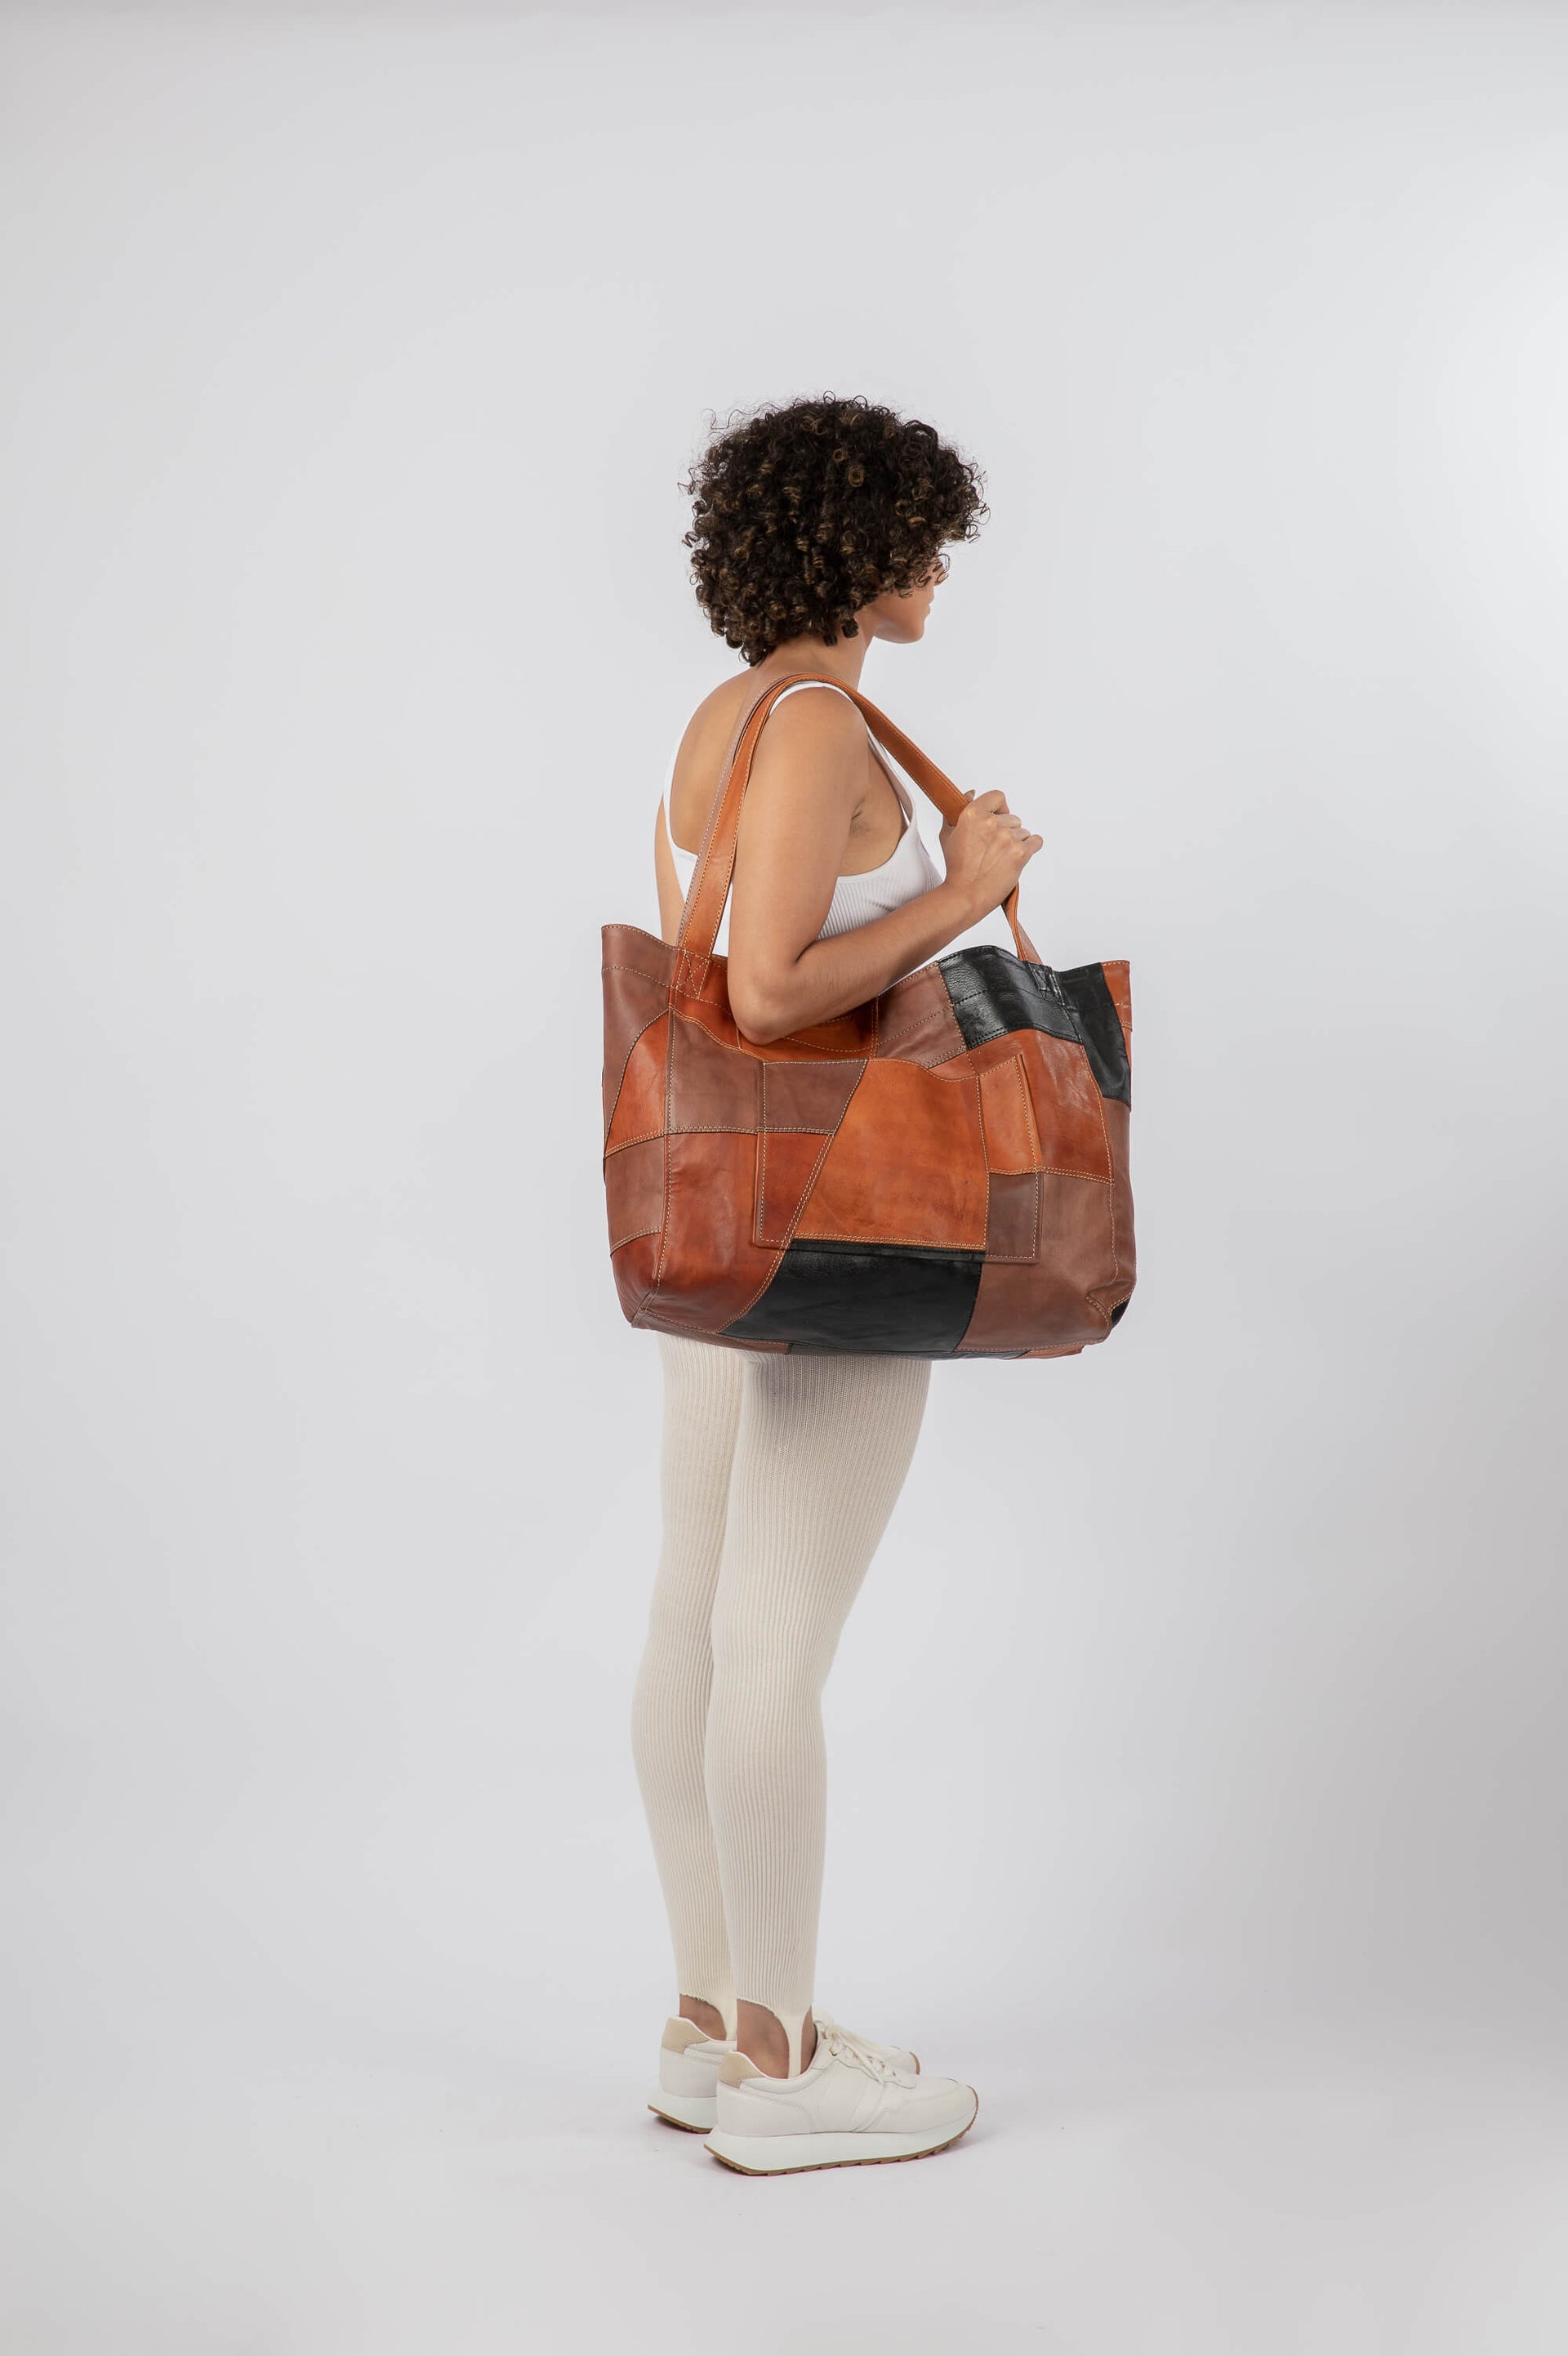 Up-cycled Patchwork Soft Leather Maxi Tote